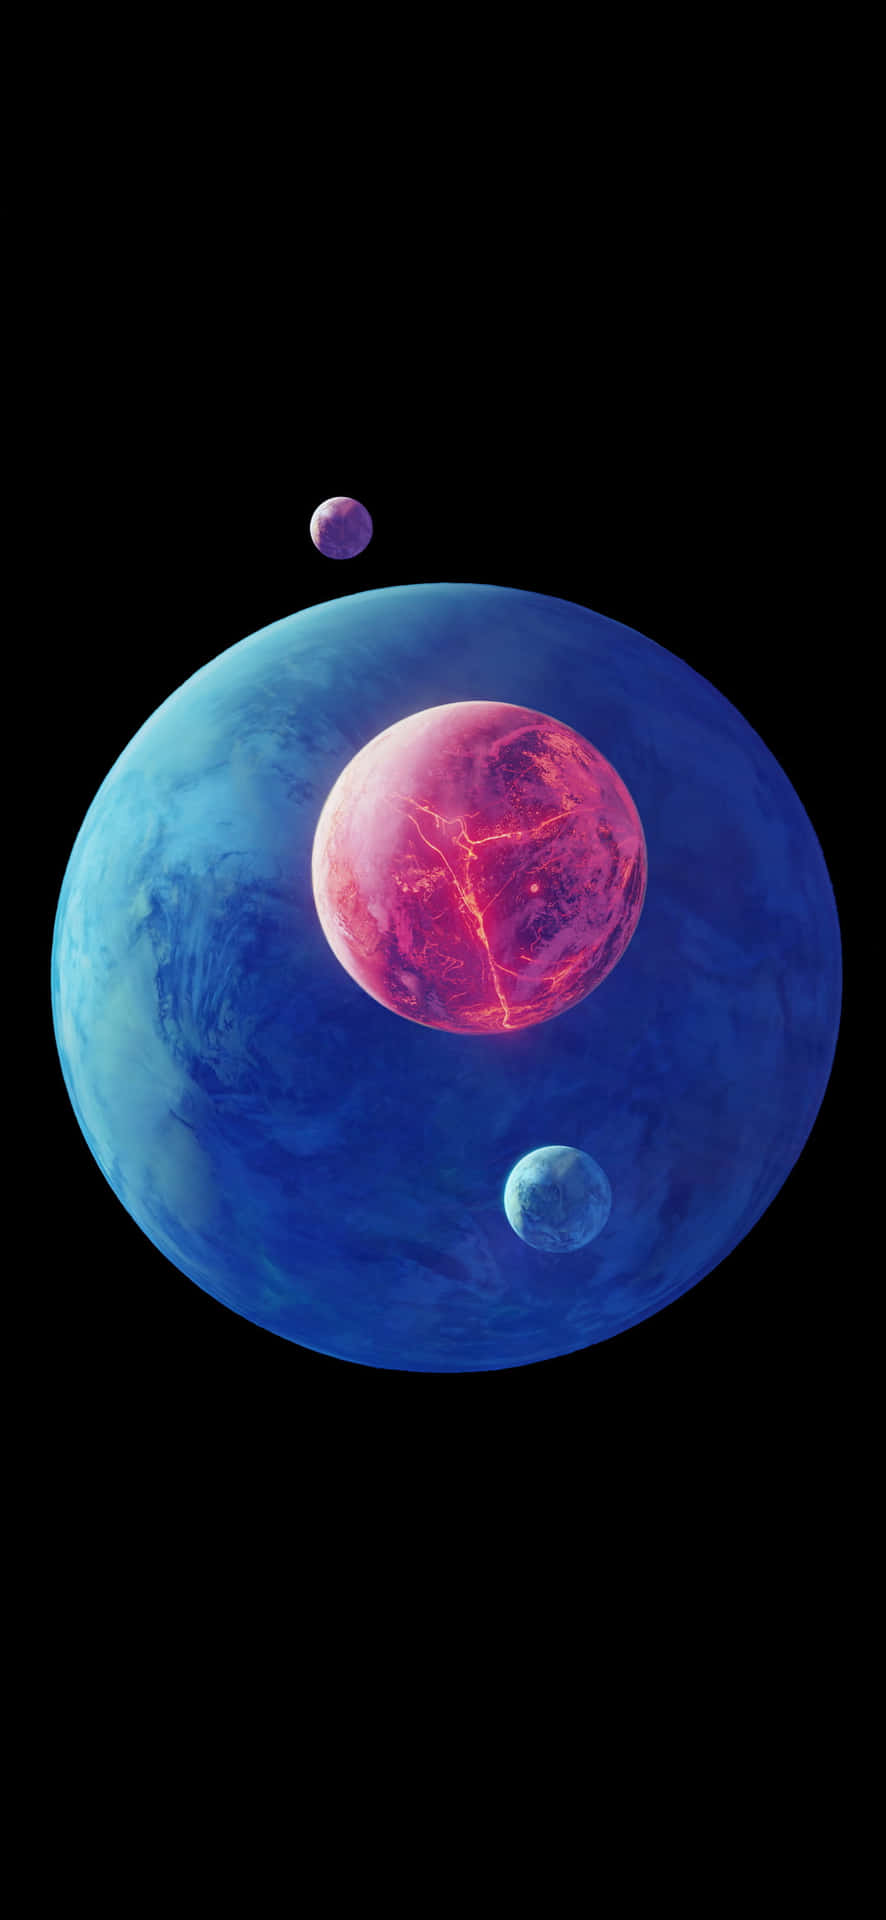 4k Amoled Background Blue And Pink Planets